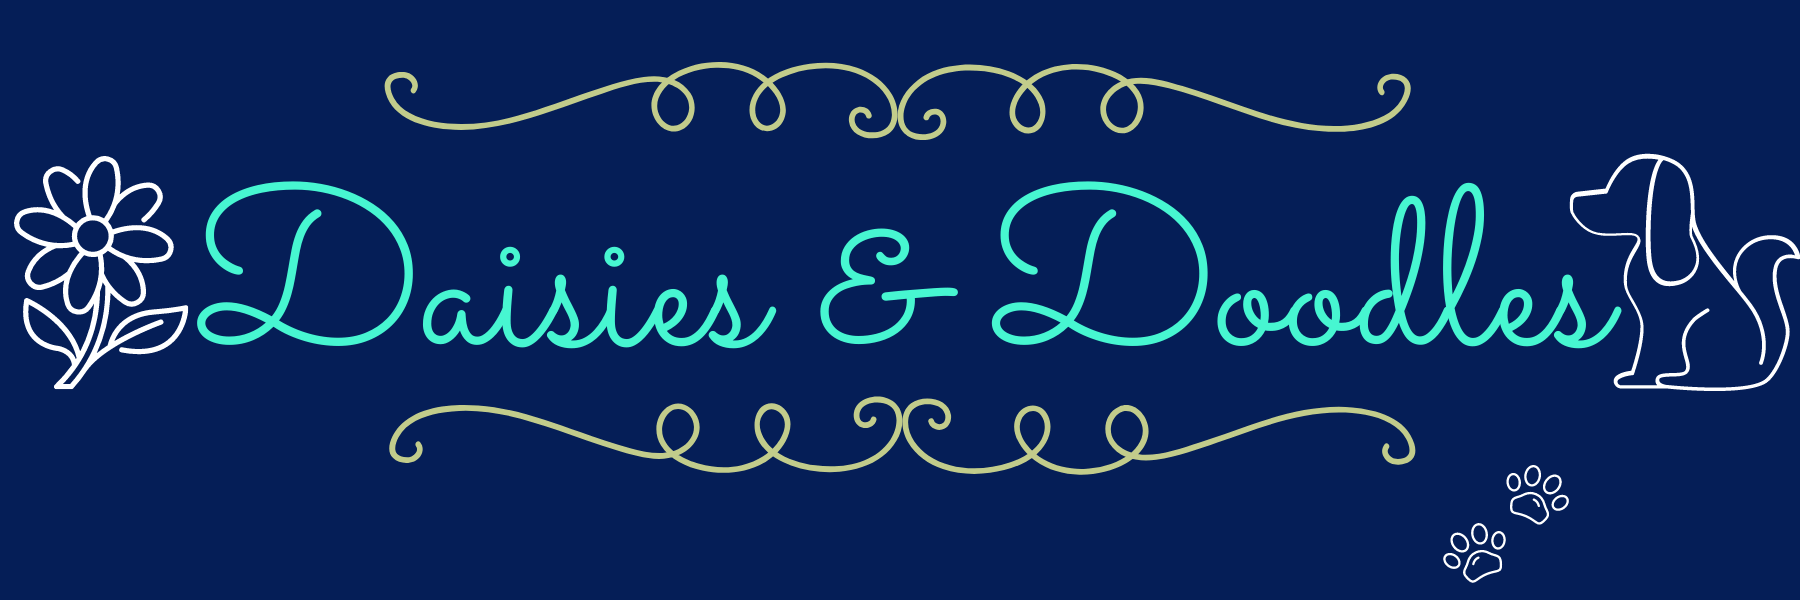 Daisies and Doodles logo